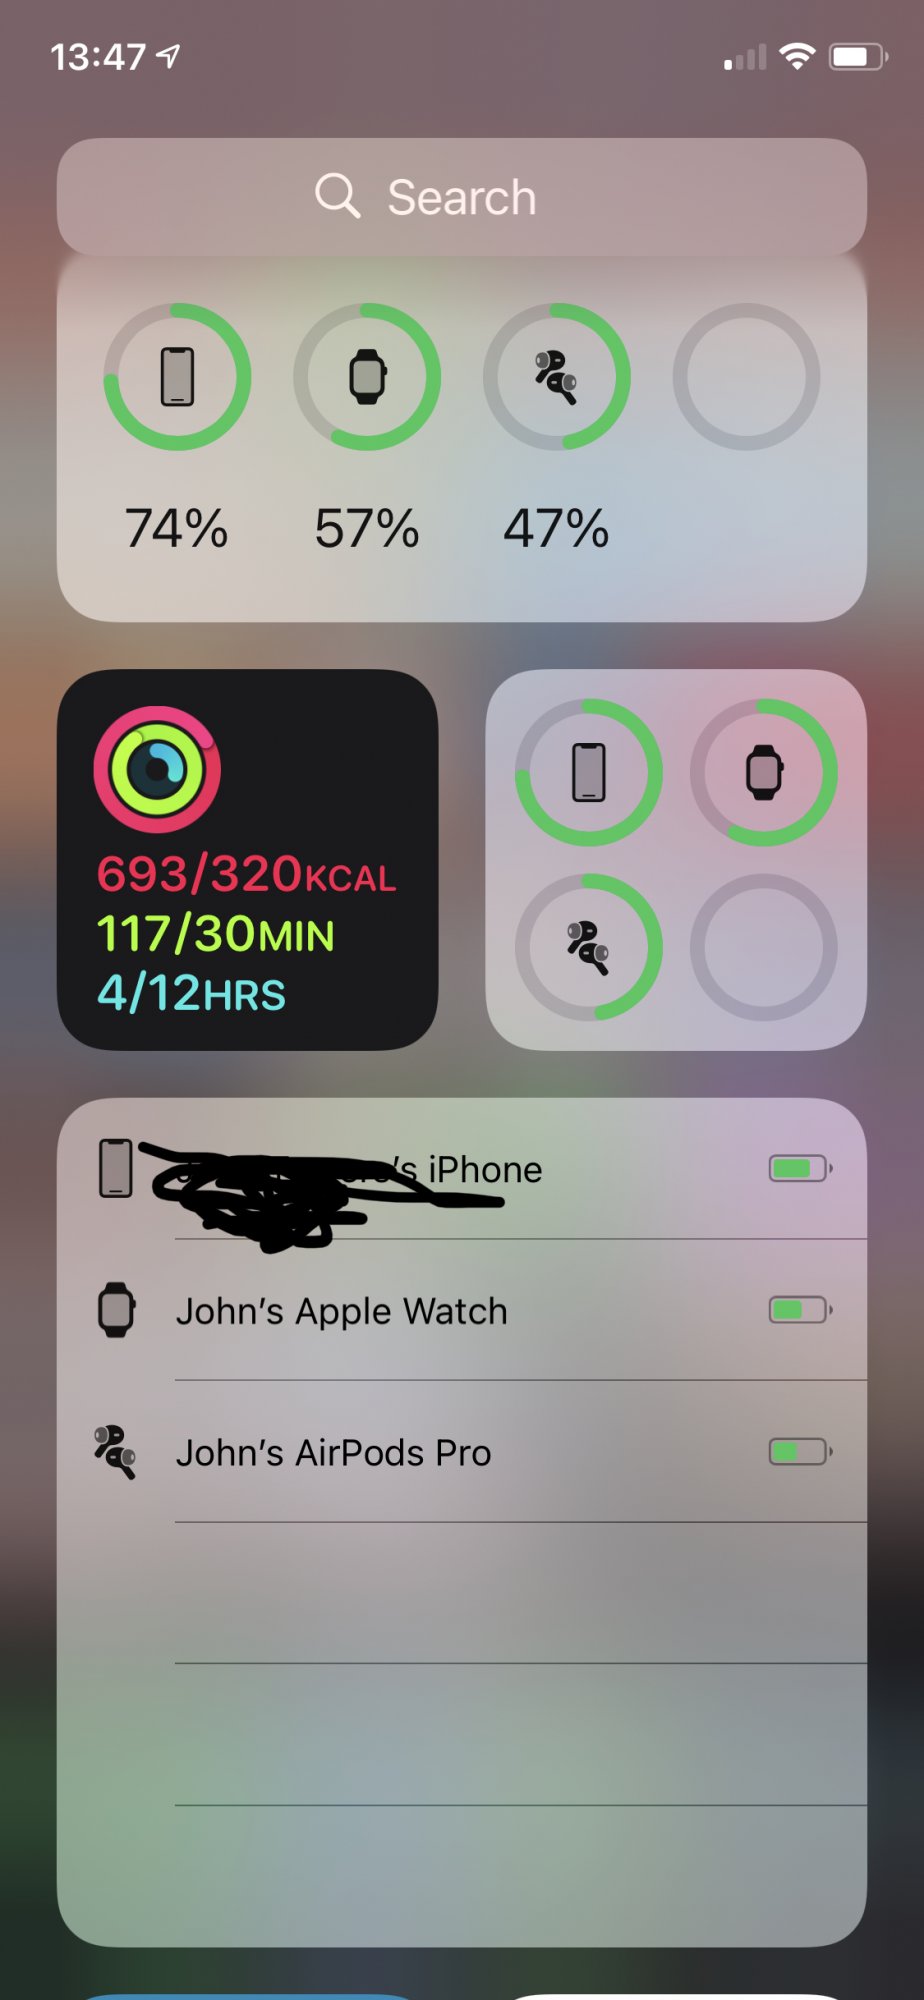 battery widget knobbled so it's useless for AirPod users | MacRumors Forums